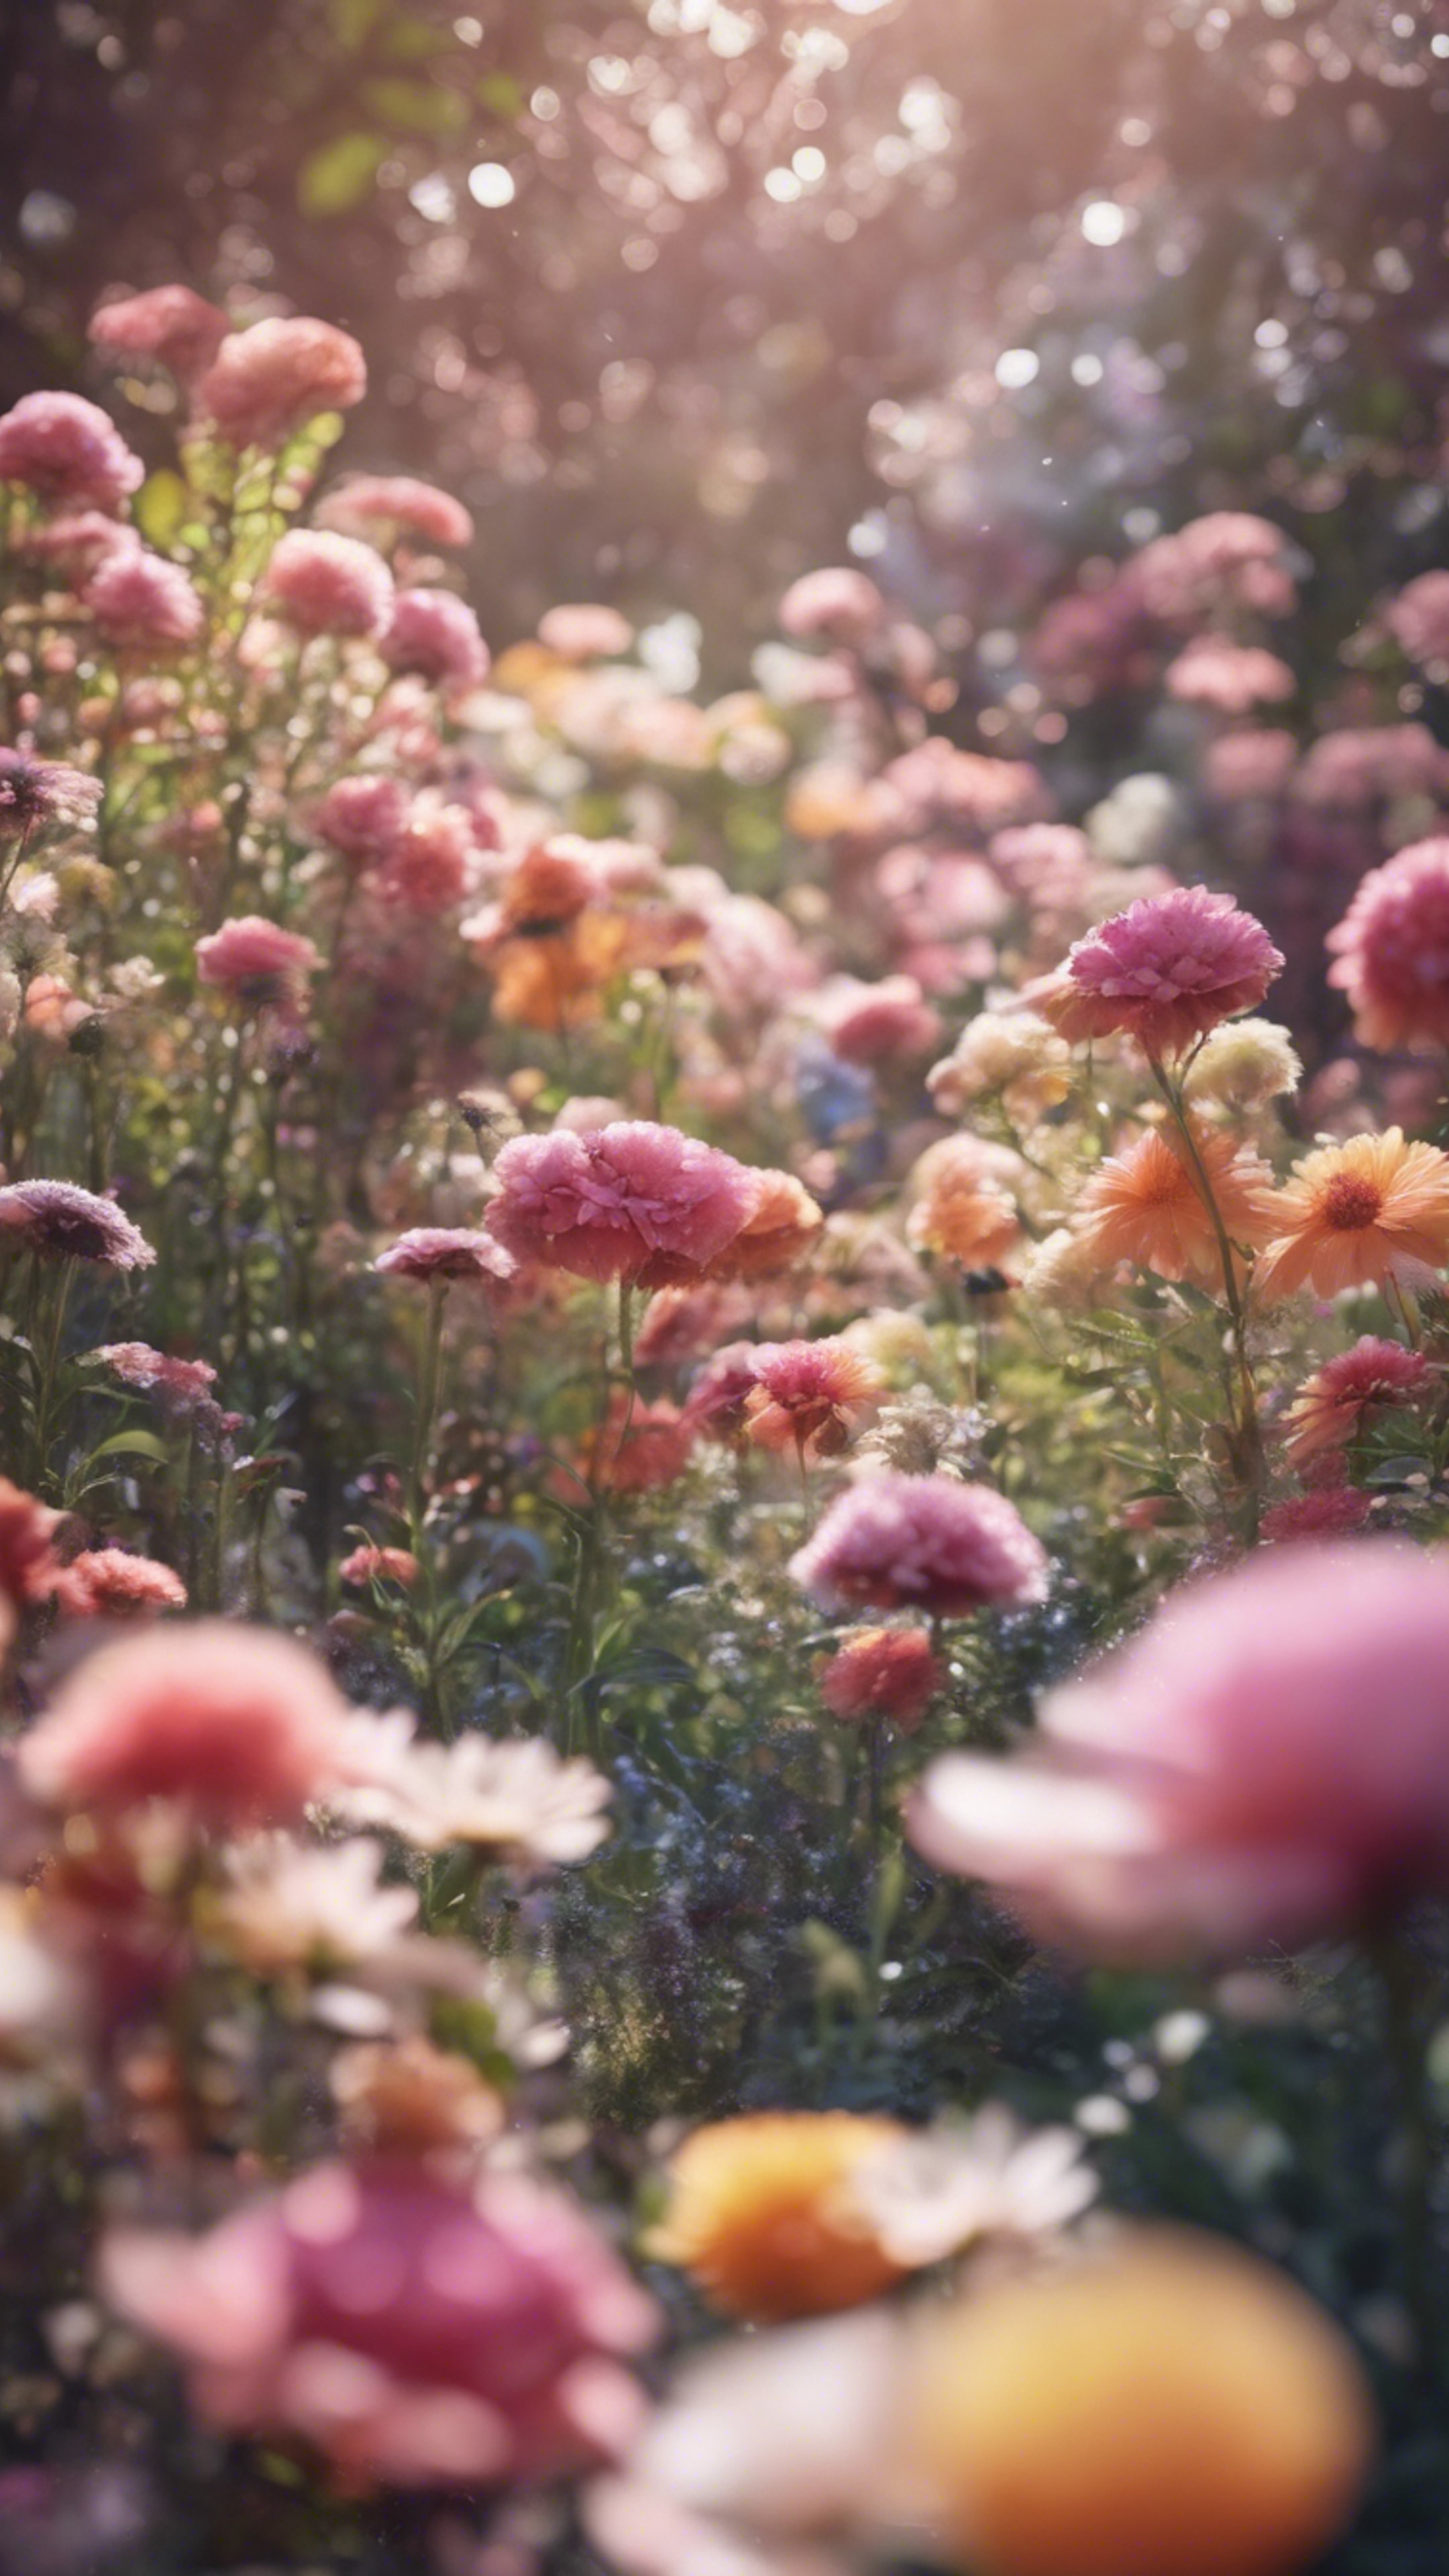 A magical garden blooming with candy colored flowers in a dream.壁紙[e2278ee8860d4a359b98]